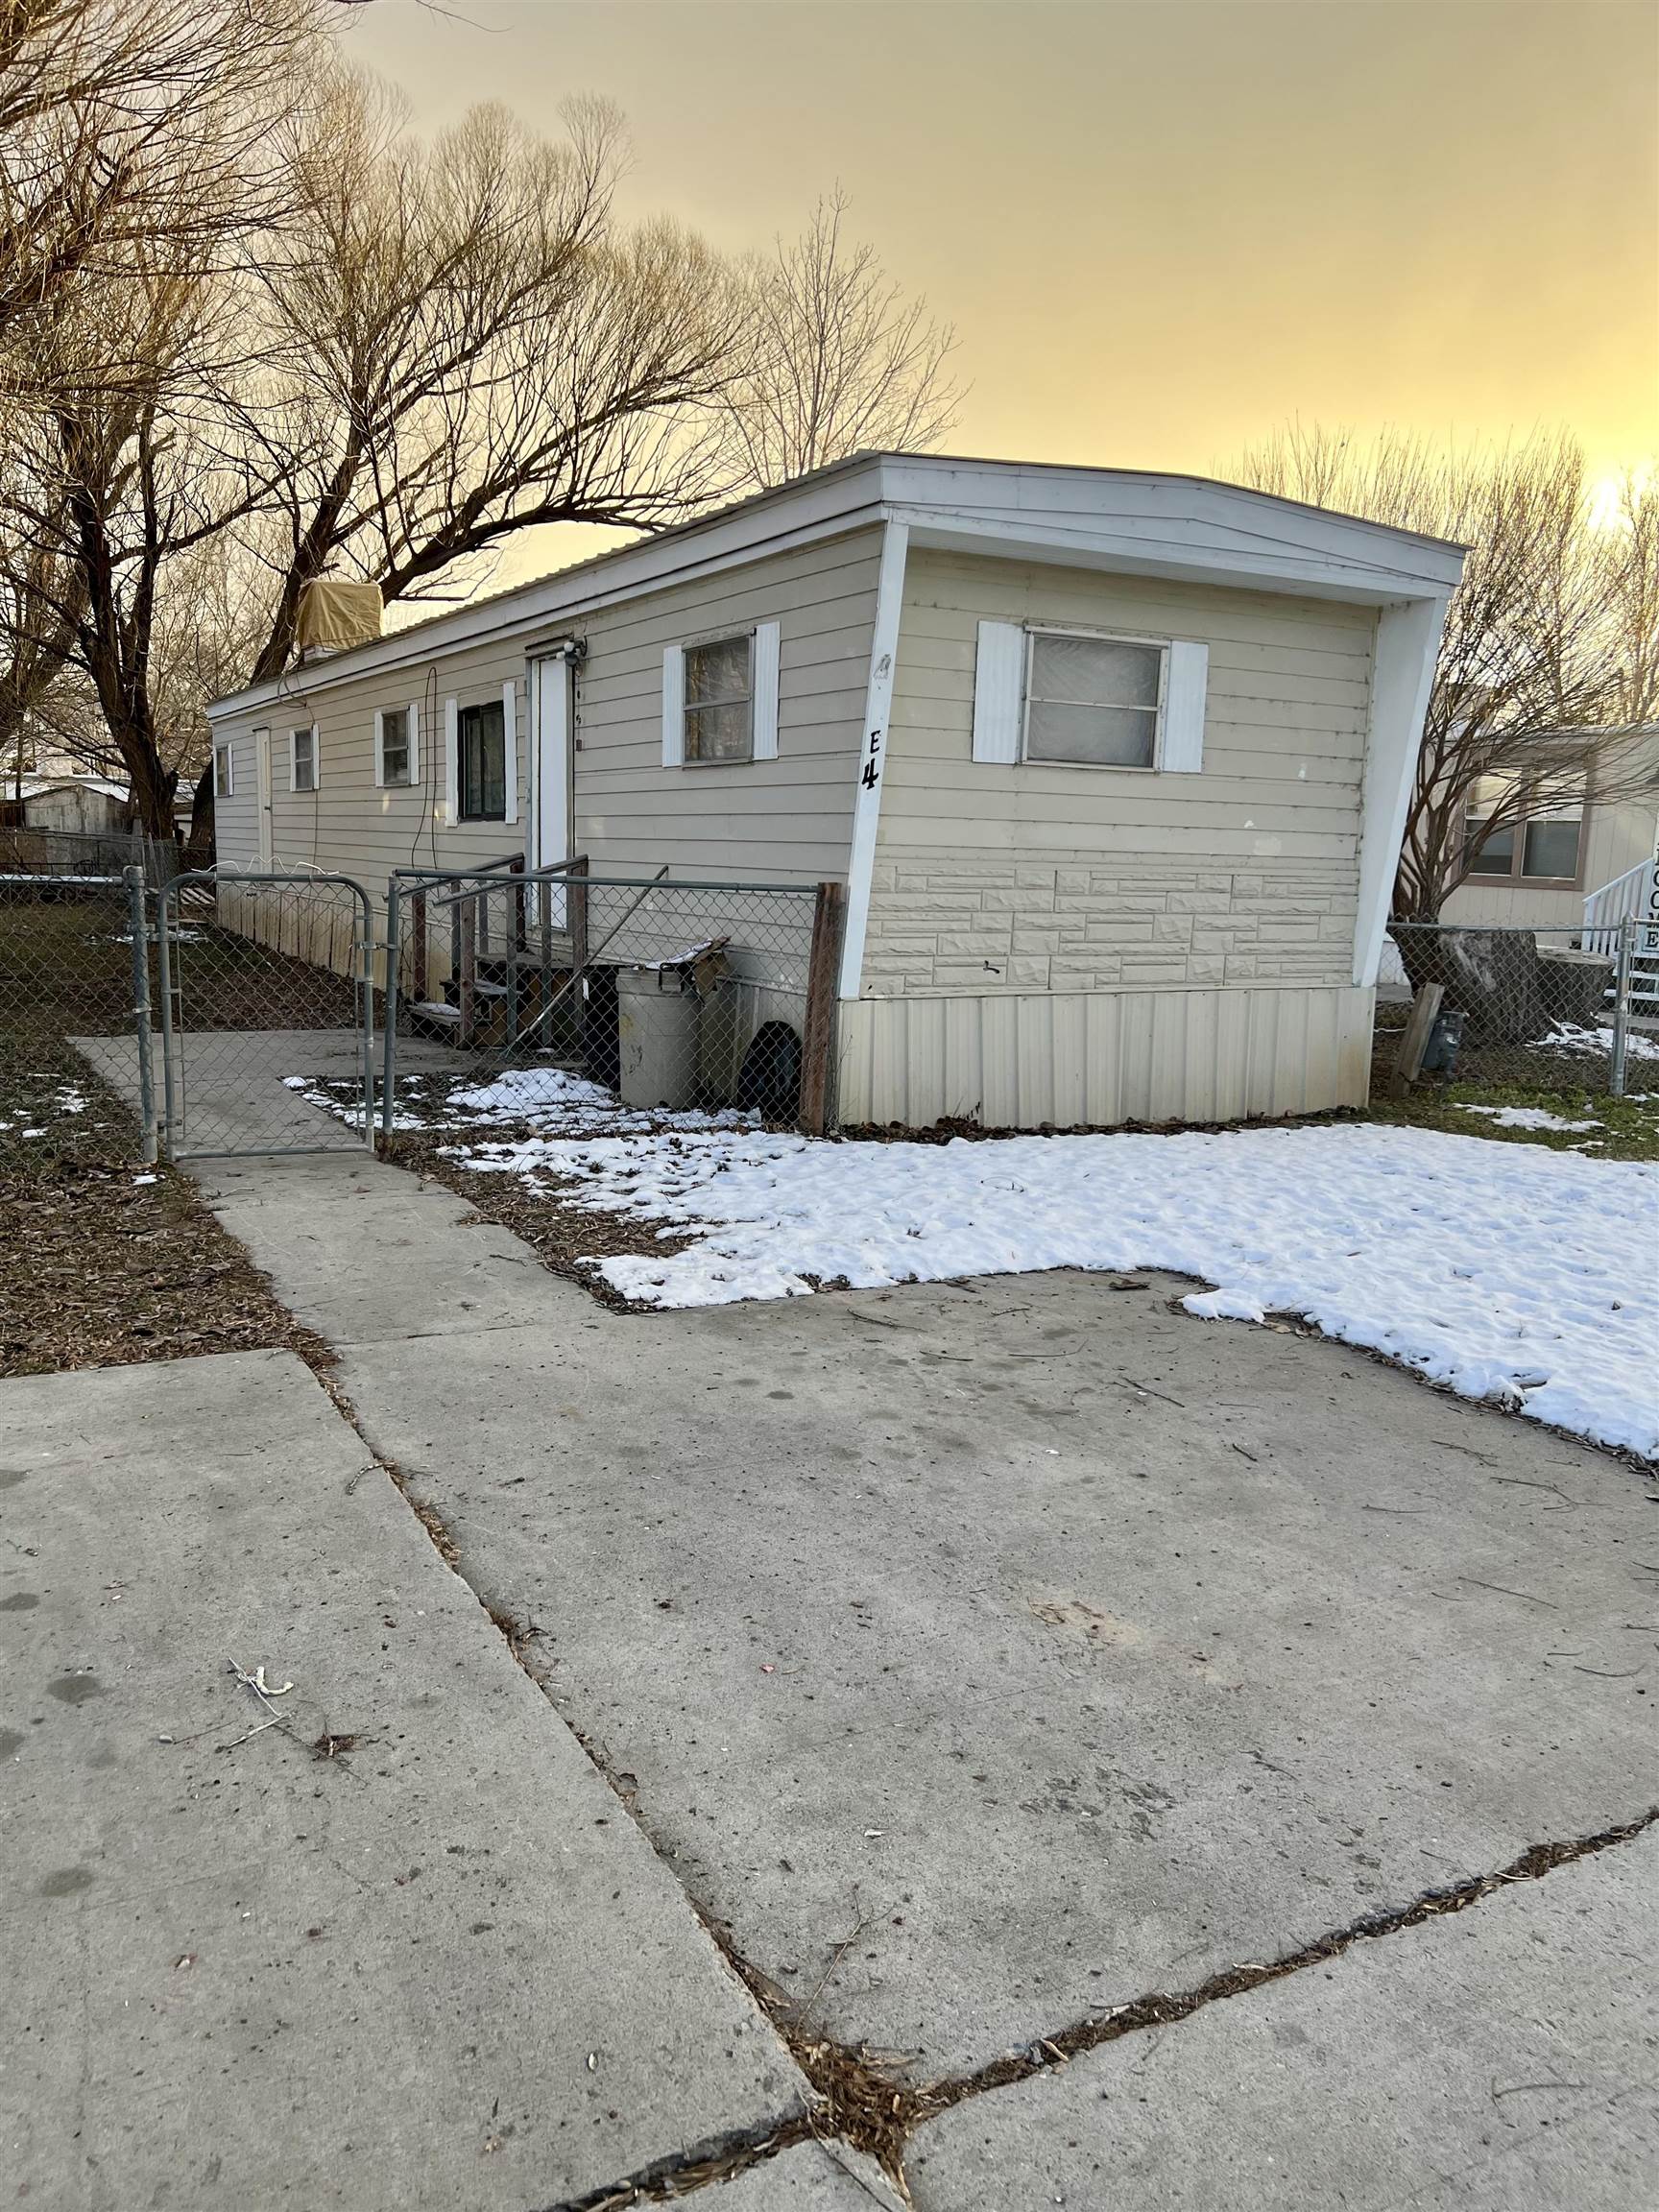 Desirable Fruita location. Single wide manufactured home with a new metal roof in 2019. Seller also replaced all water lines in the home in 2019. Seller also installed a new heater in 2019. Mature landscaping.